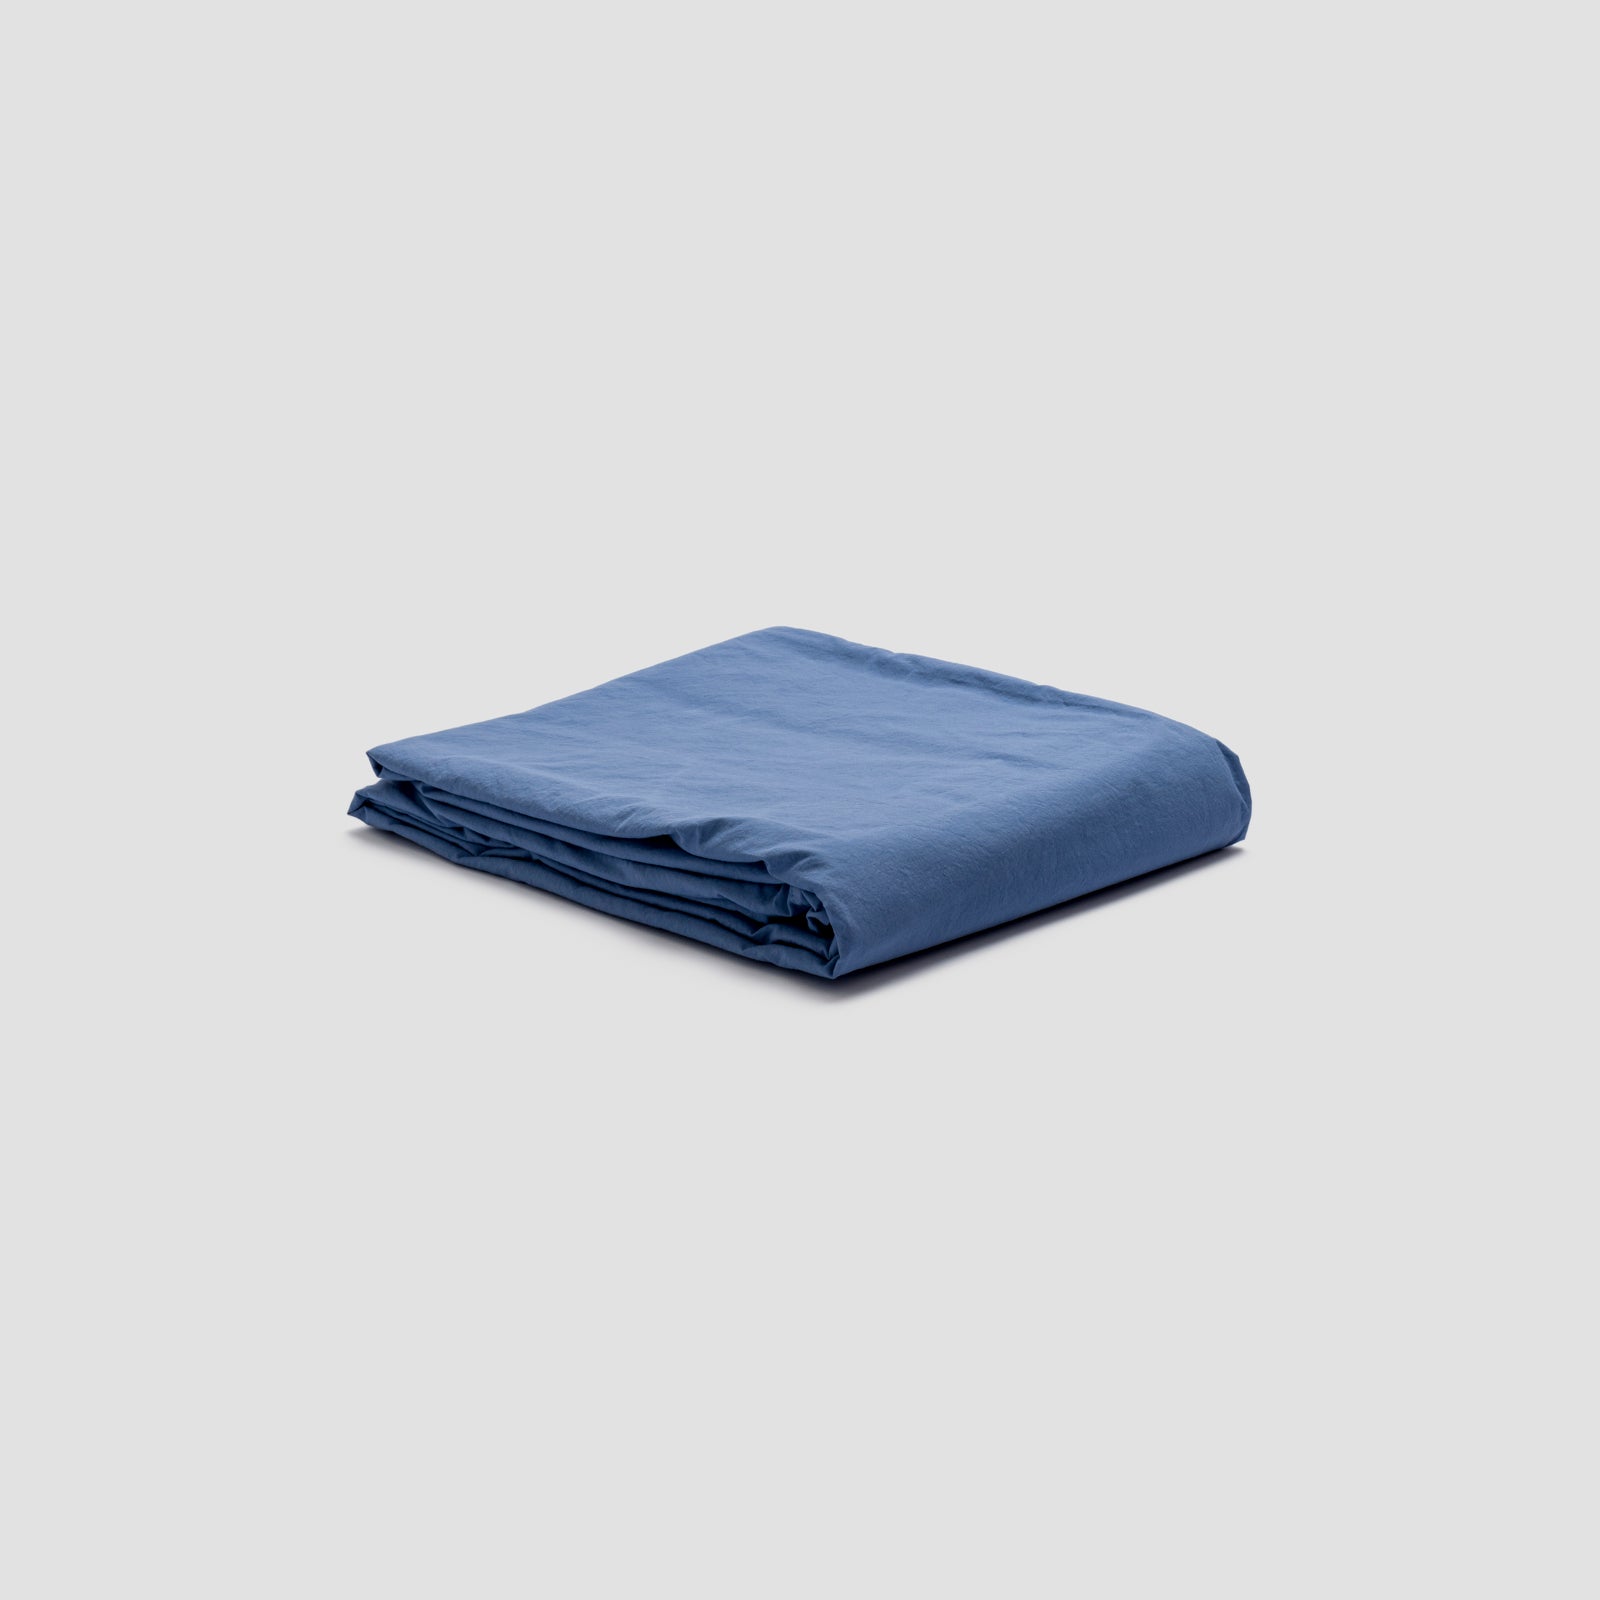 Cove Blue Washed Percale Cotton Duvet Cover